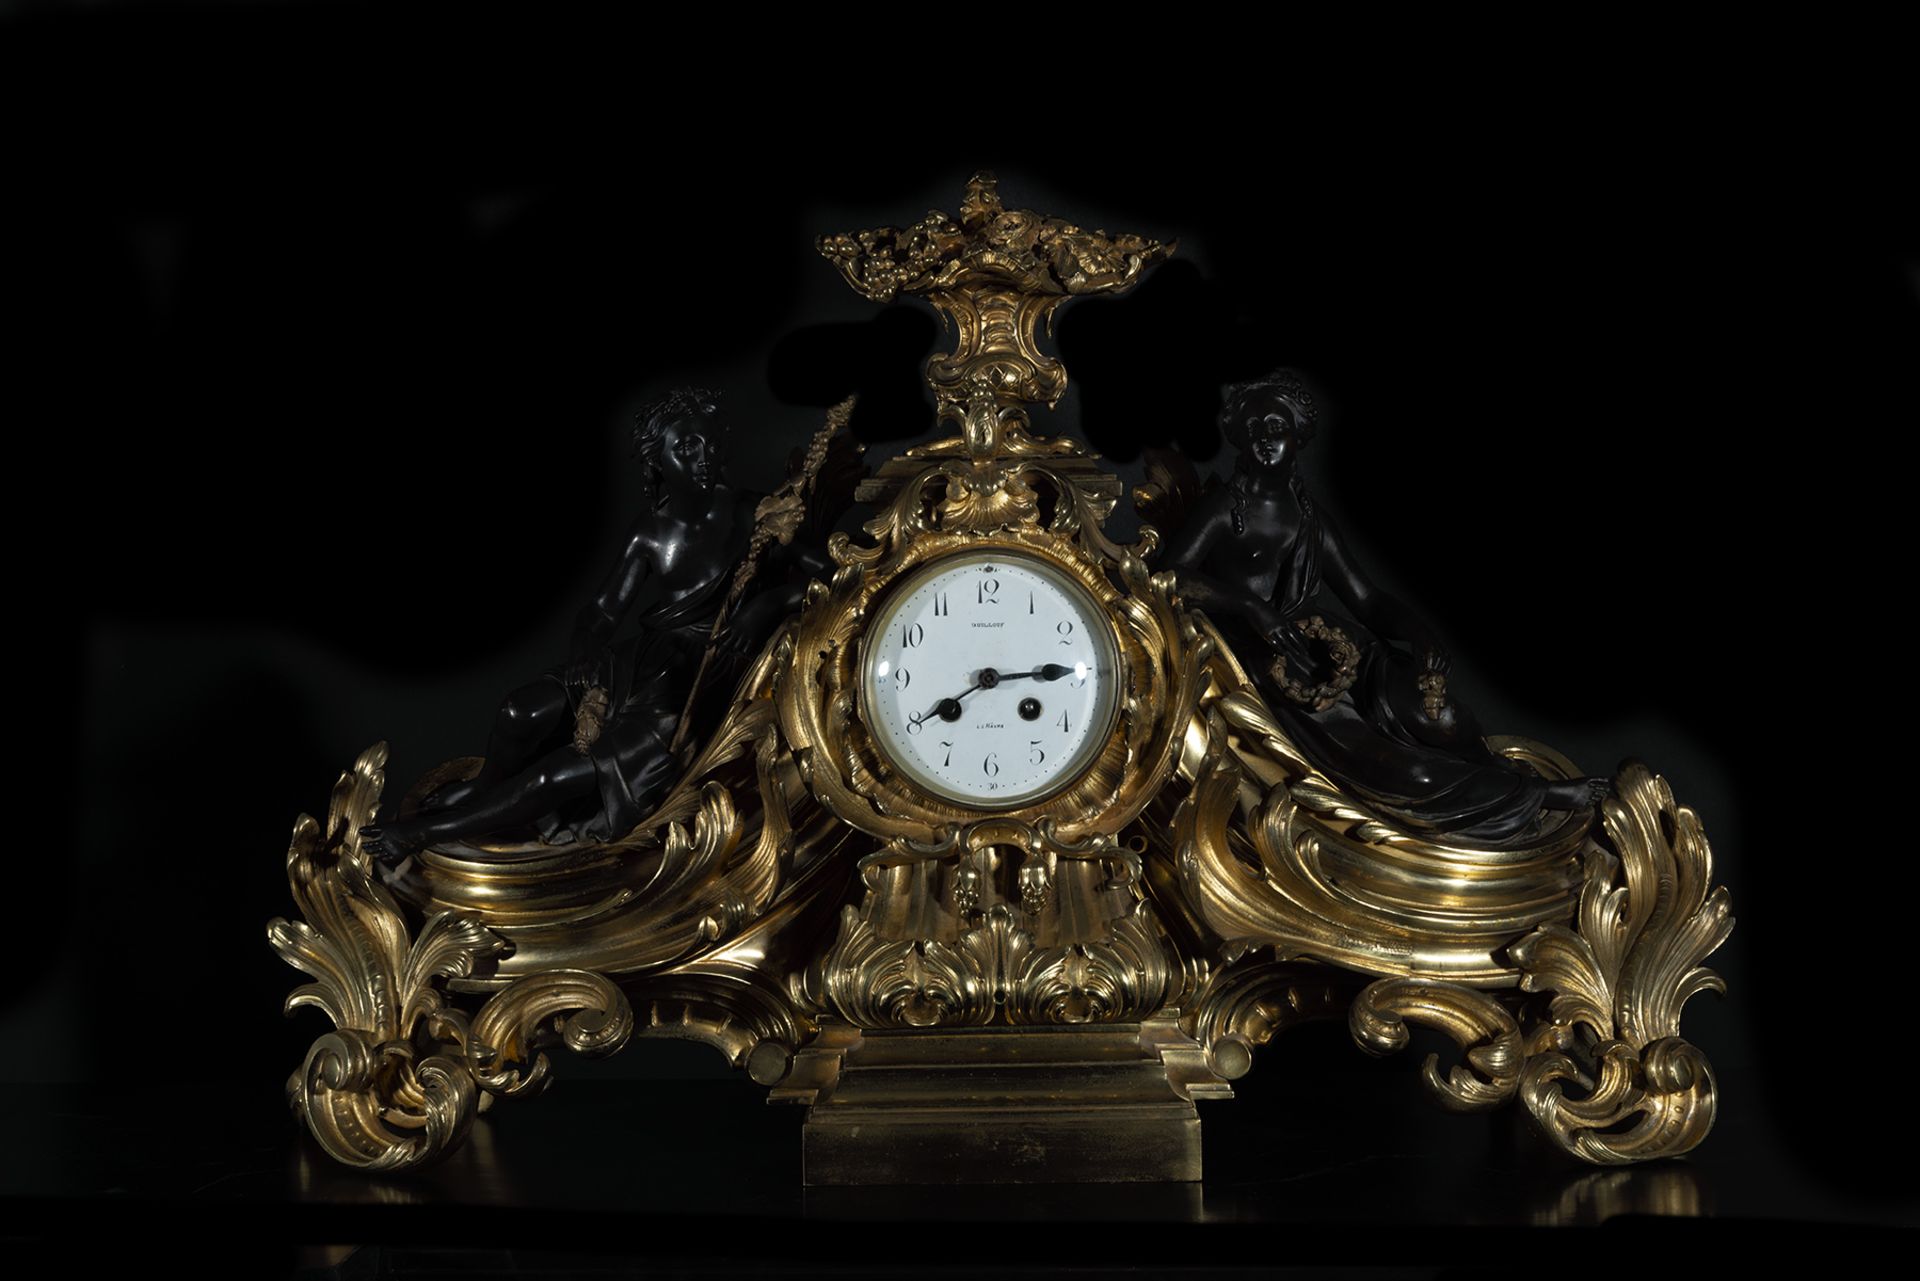 Very large Regency style Table Clock with garrison of Guardian Angels, in gilt and blued bronze, 19t